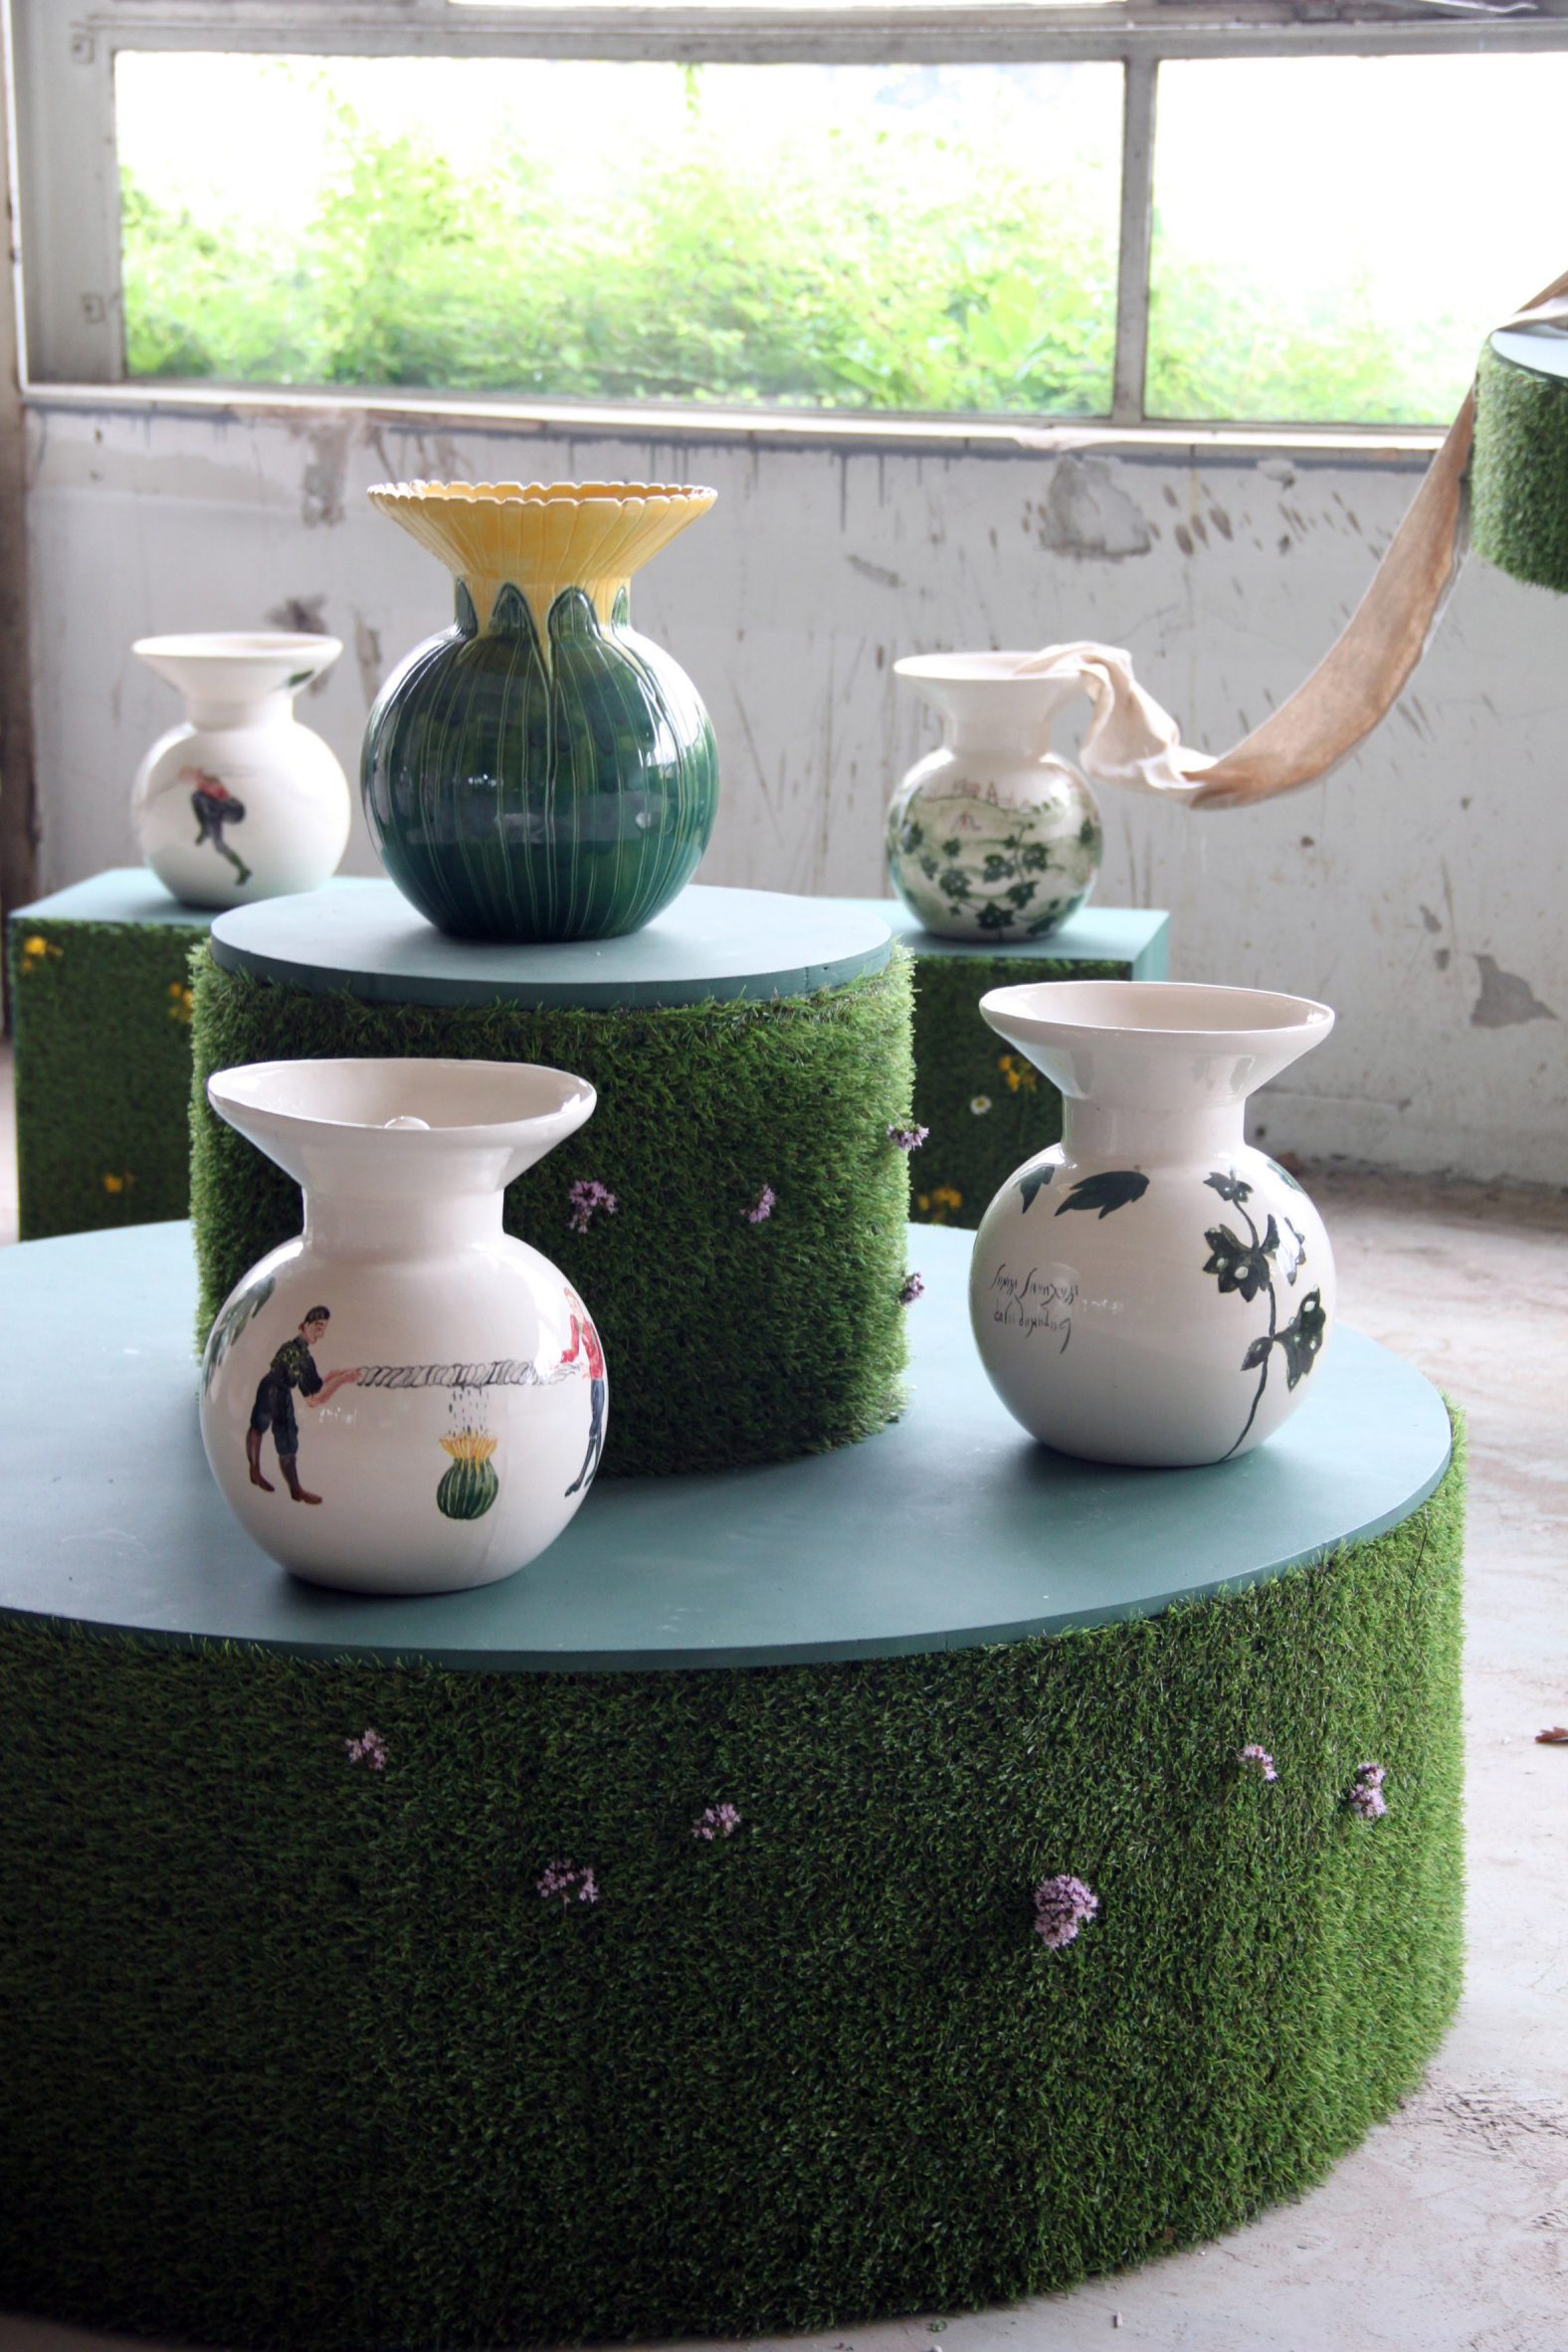 Pauline Rip, ceramic vases used for collecting morning dew for elves